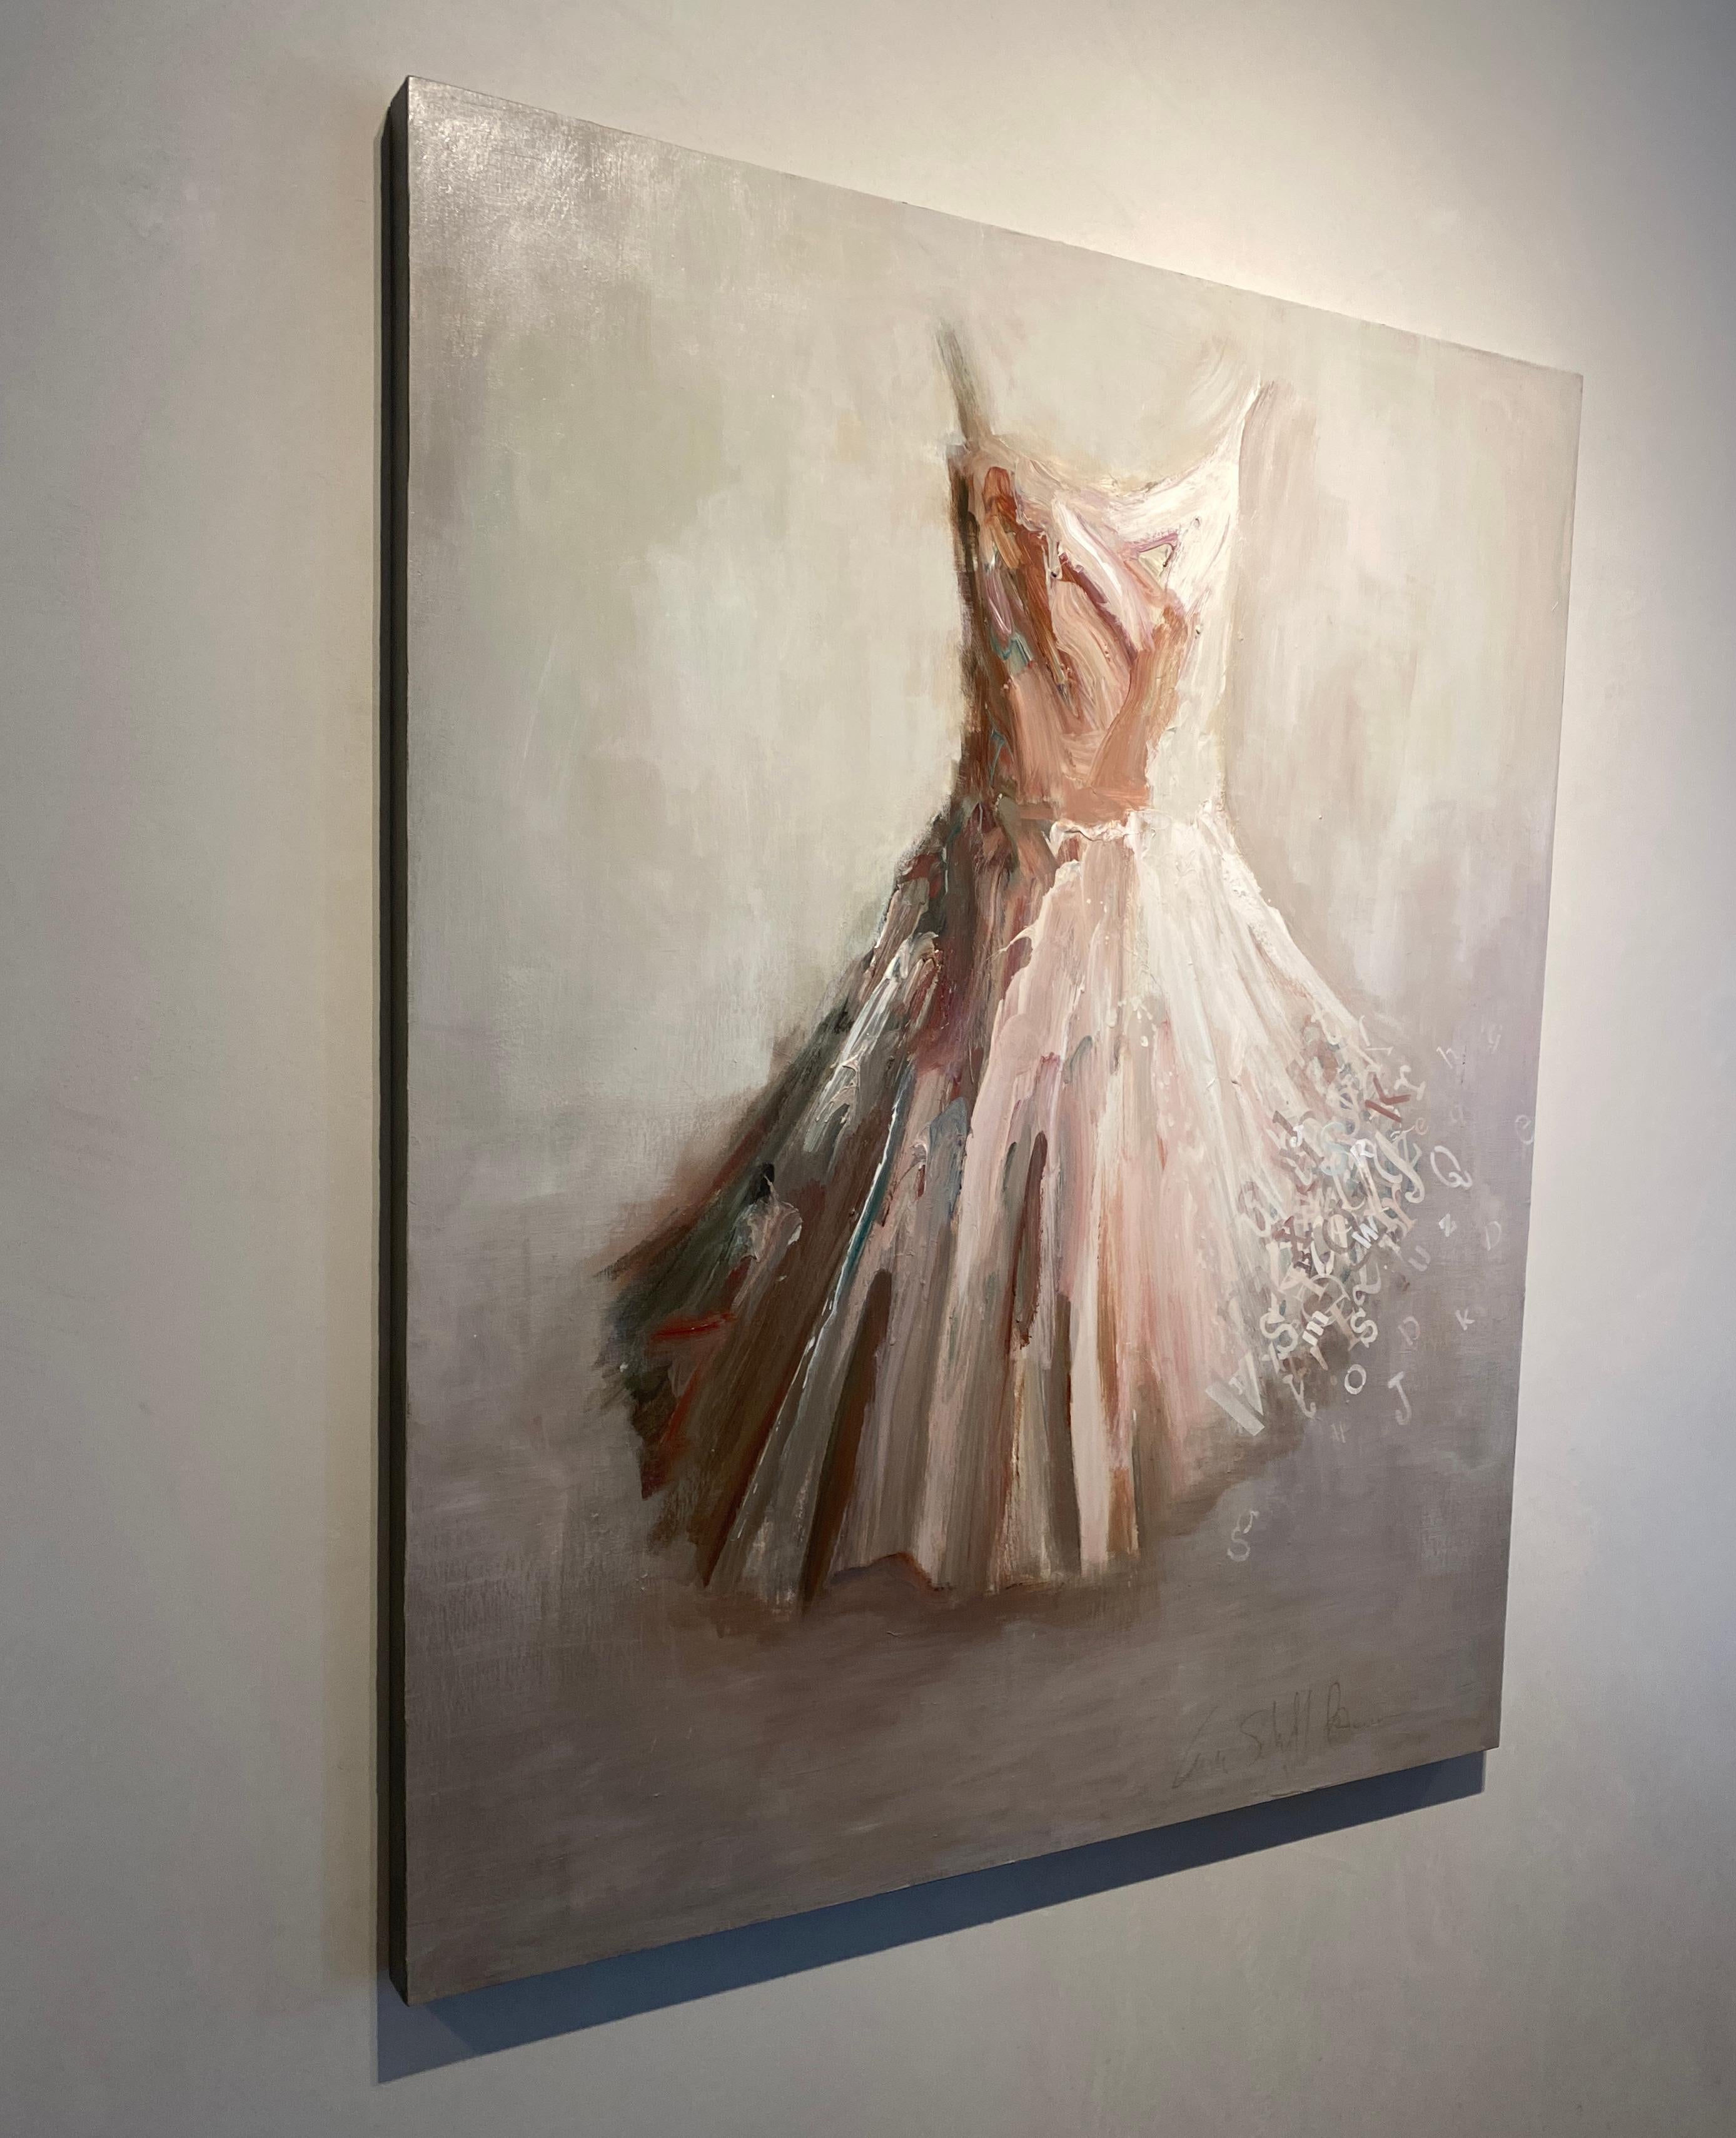 All Things Eventually- Blush toned dress portrait painting by Laura Schiff Bean 2